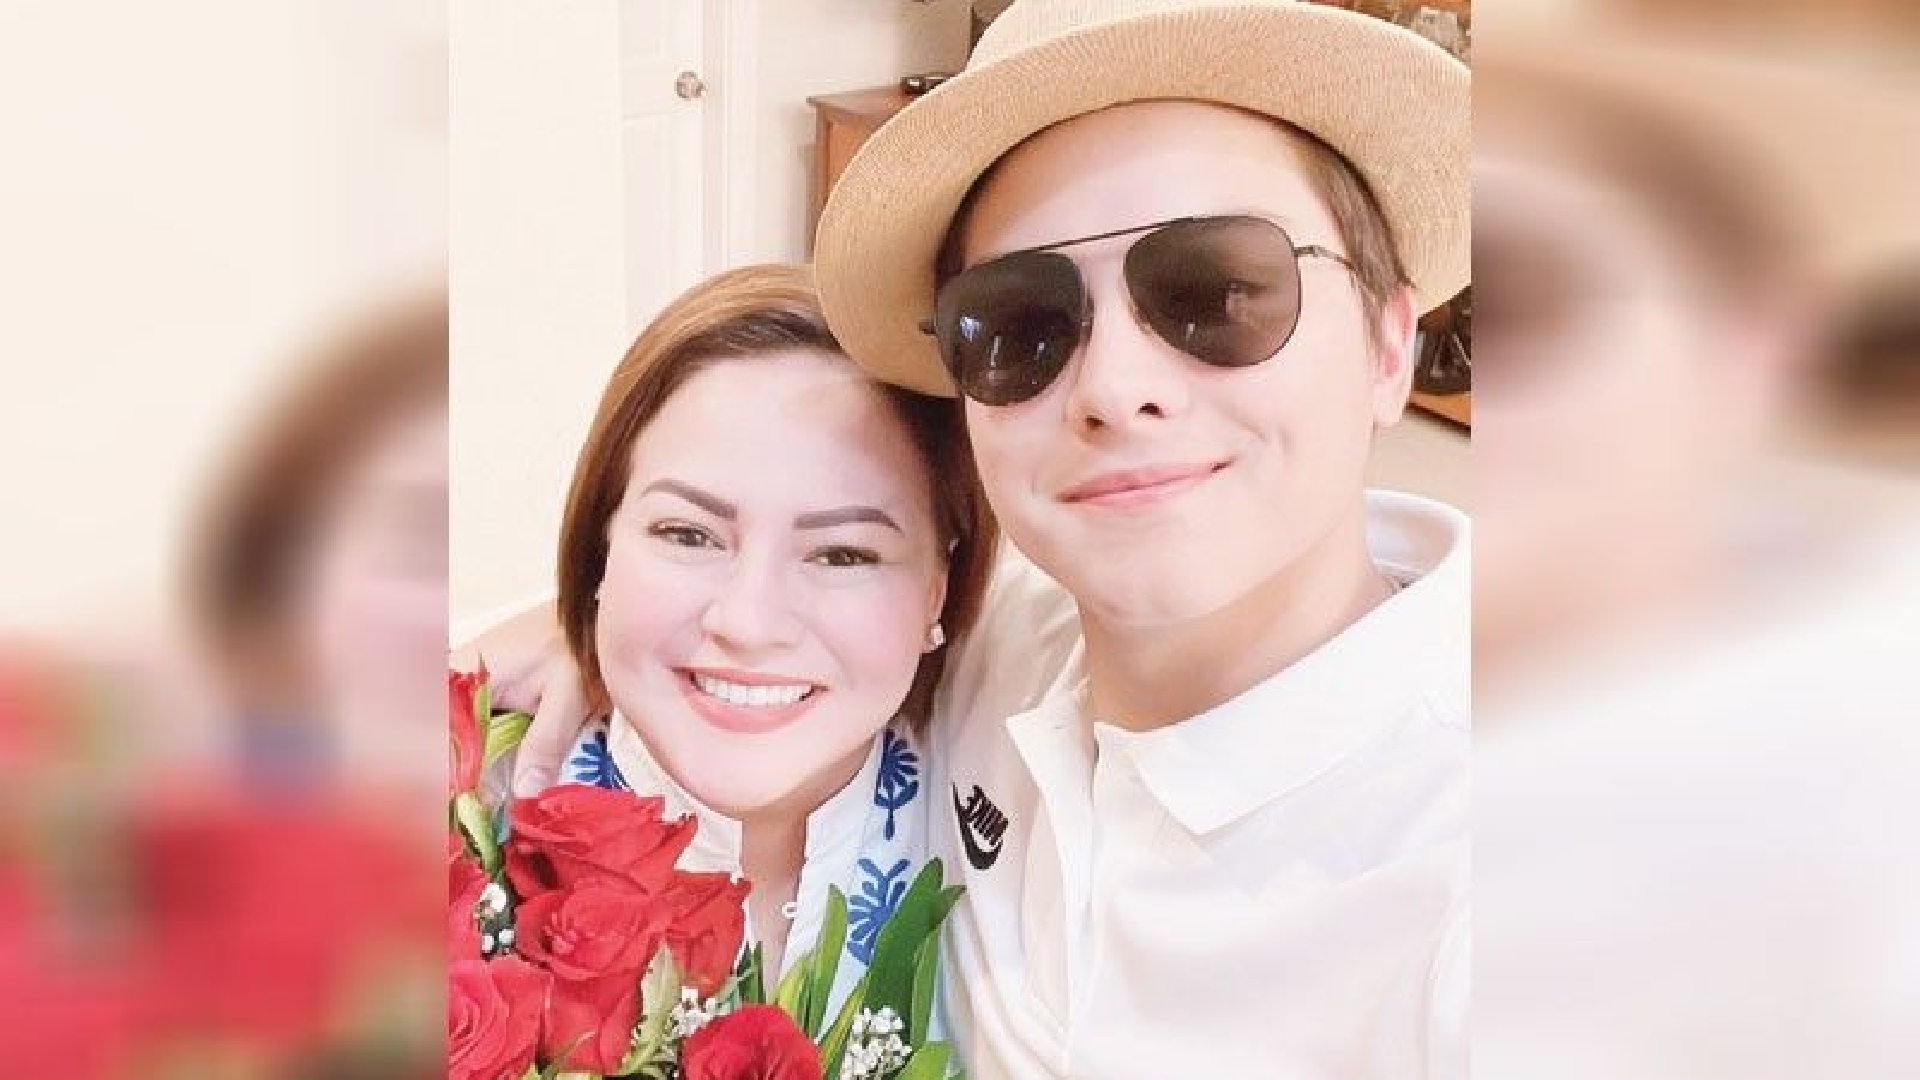 Daniel Padilla, Karla Estrada's son, needs to grow from his "mistakes" and become a better person.